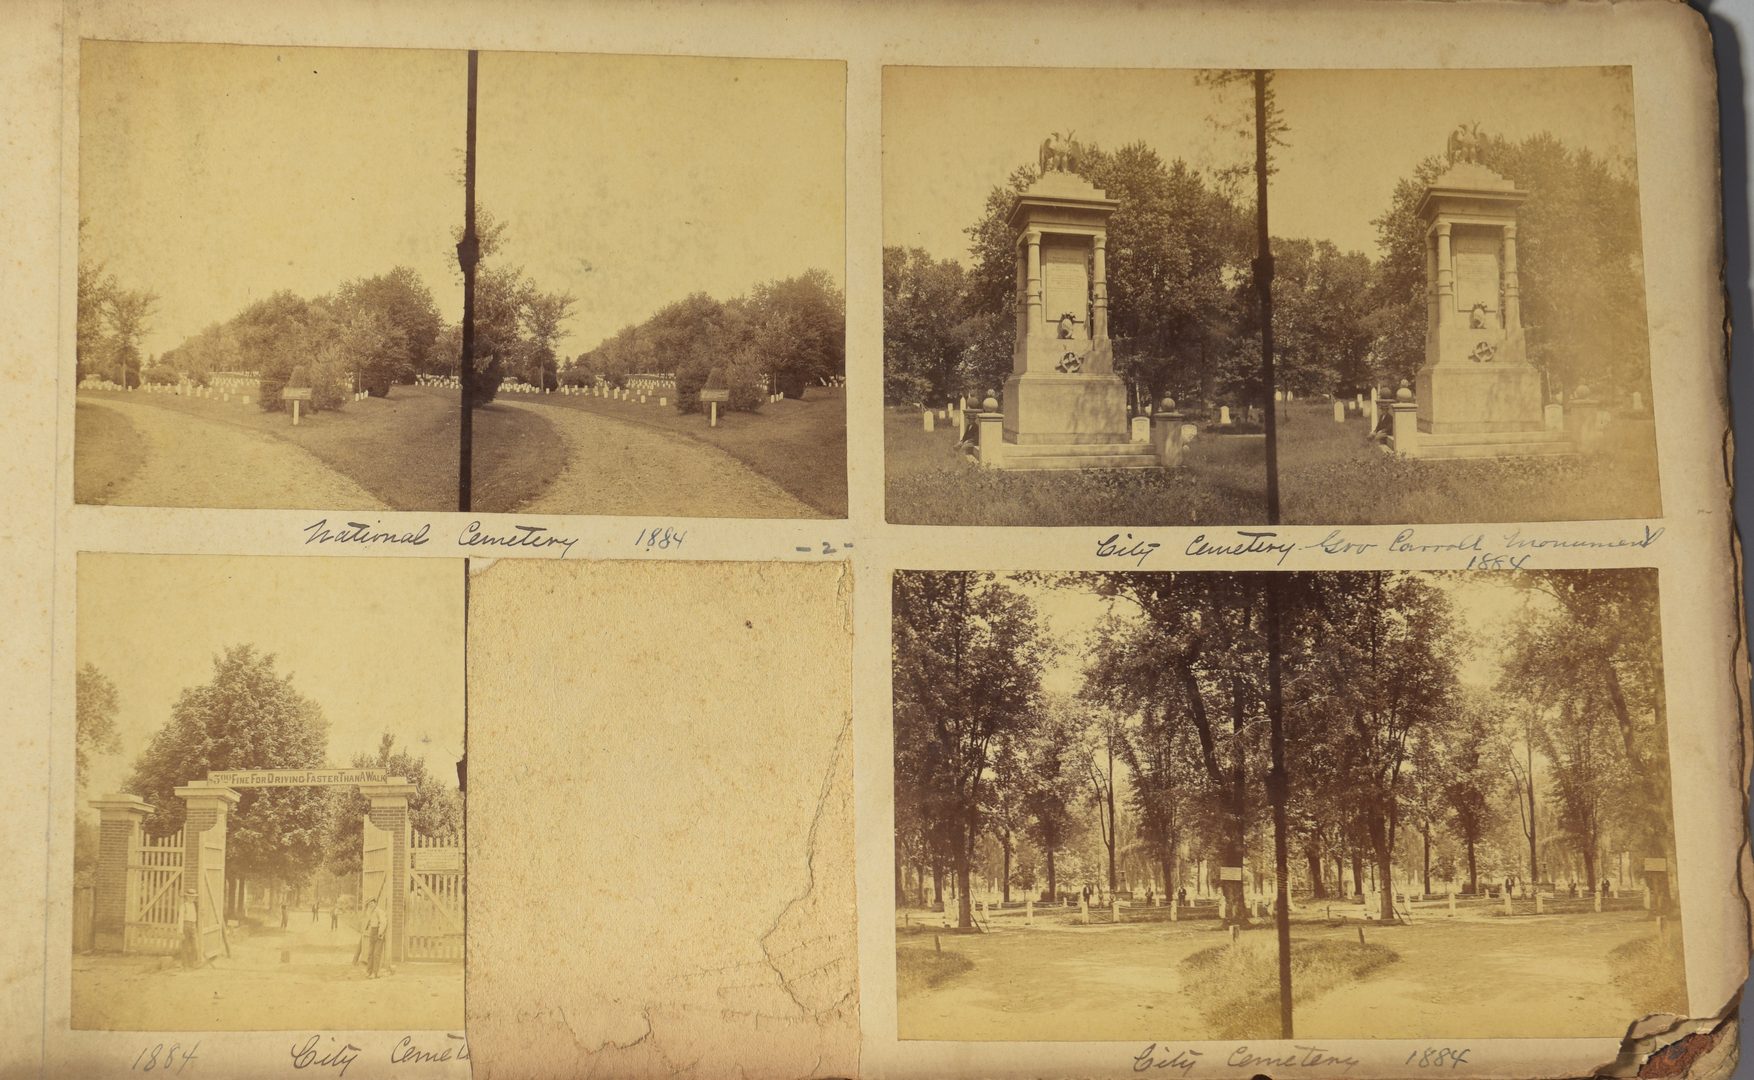 Lot 254: Giers Nashville Archive 1 – Album of Stereoview Images